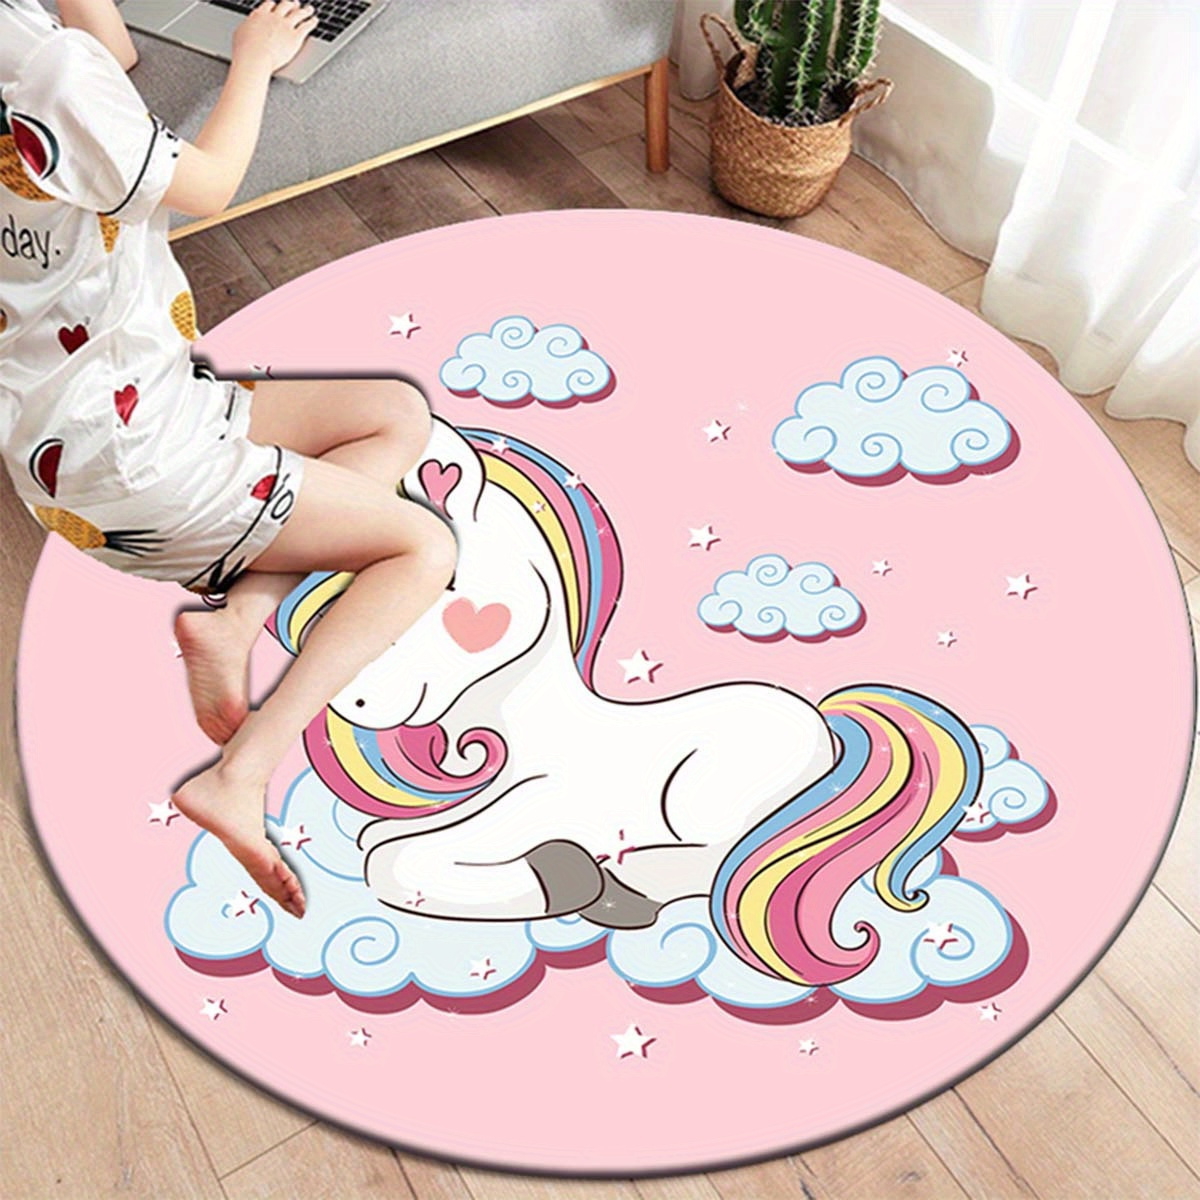 

Non-slip Unicorn Pattern Round Area Rug - Polyester, Hand Wash, Indoor/outdoor Carpet For Bedroom, Living Room, Nursery, Office Decor - Durable, Non-shedding Mat